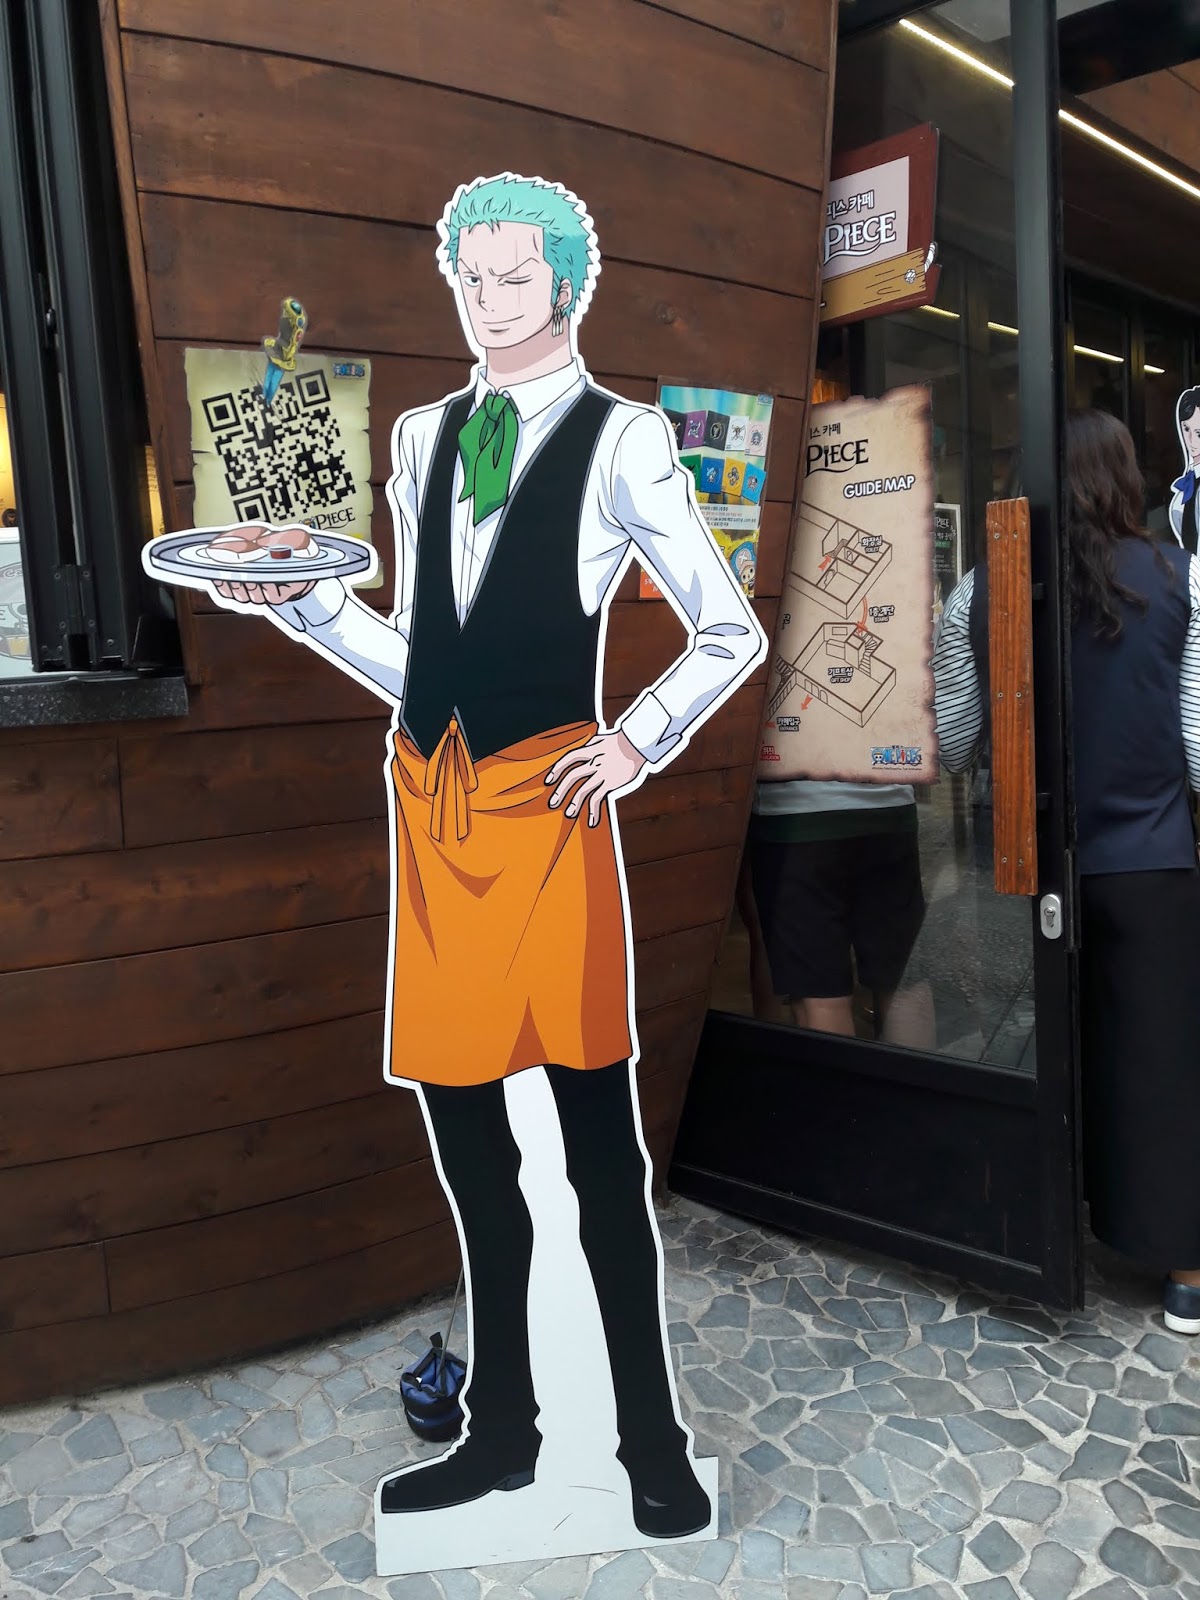 Made it to the One Piece cafe in Seoul! It was playing the opening and  ending themes on repeat. : r/OnePiece